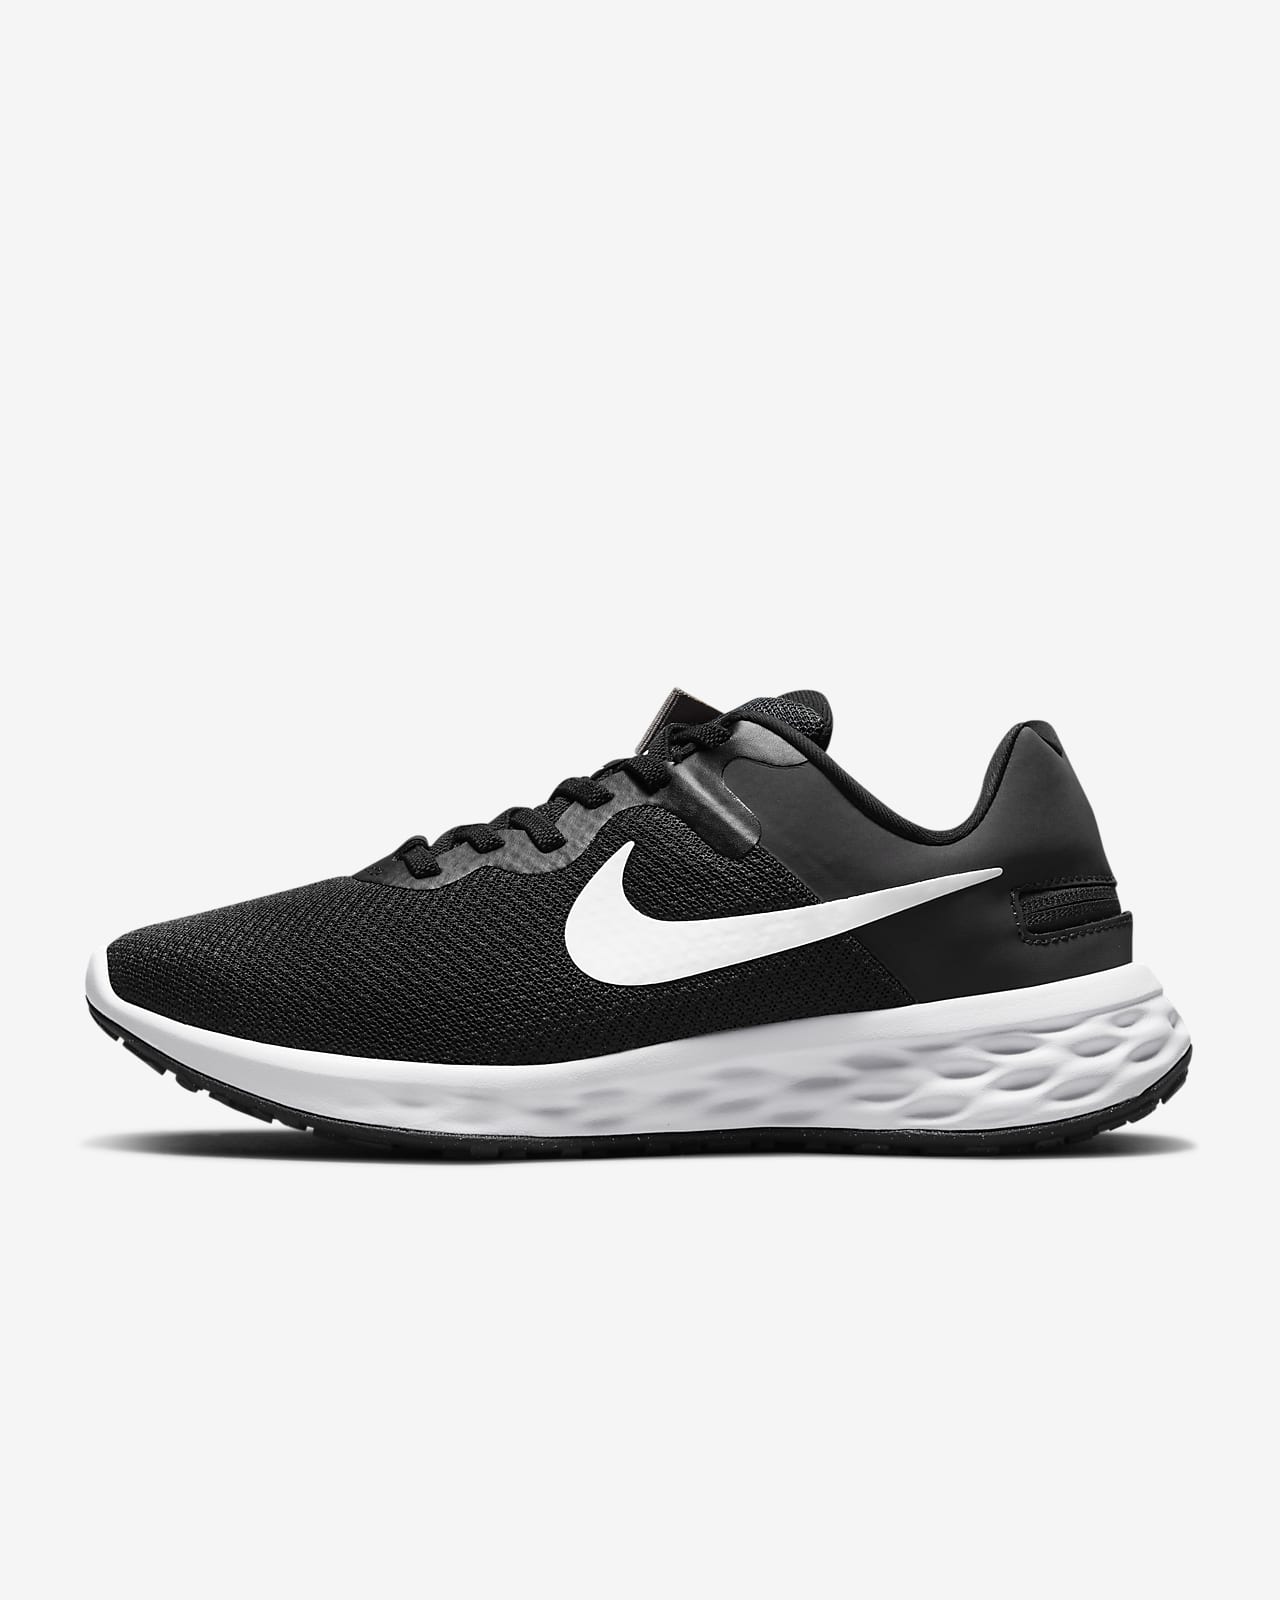 Nike Revolution 6 FlyEase LU Running Road Women\'s Shoes. On/Off Nike Easy